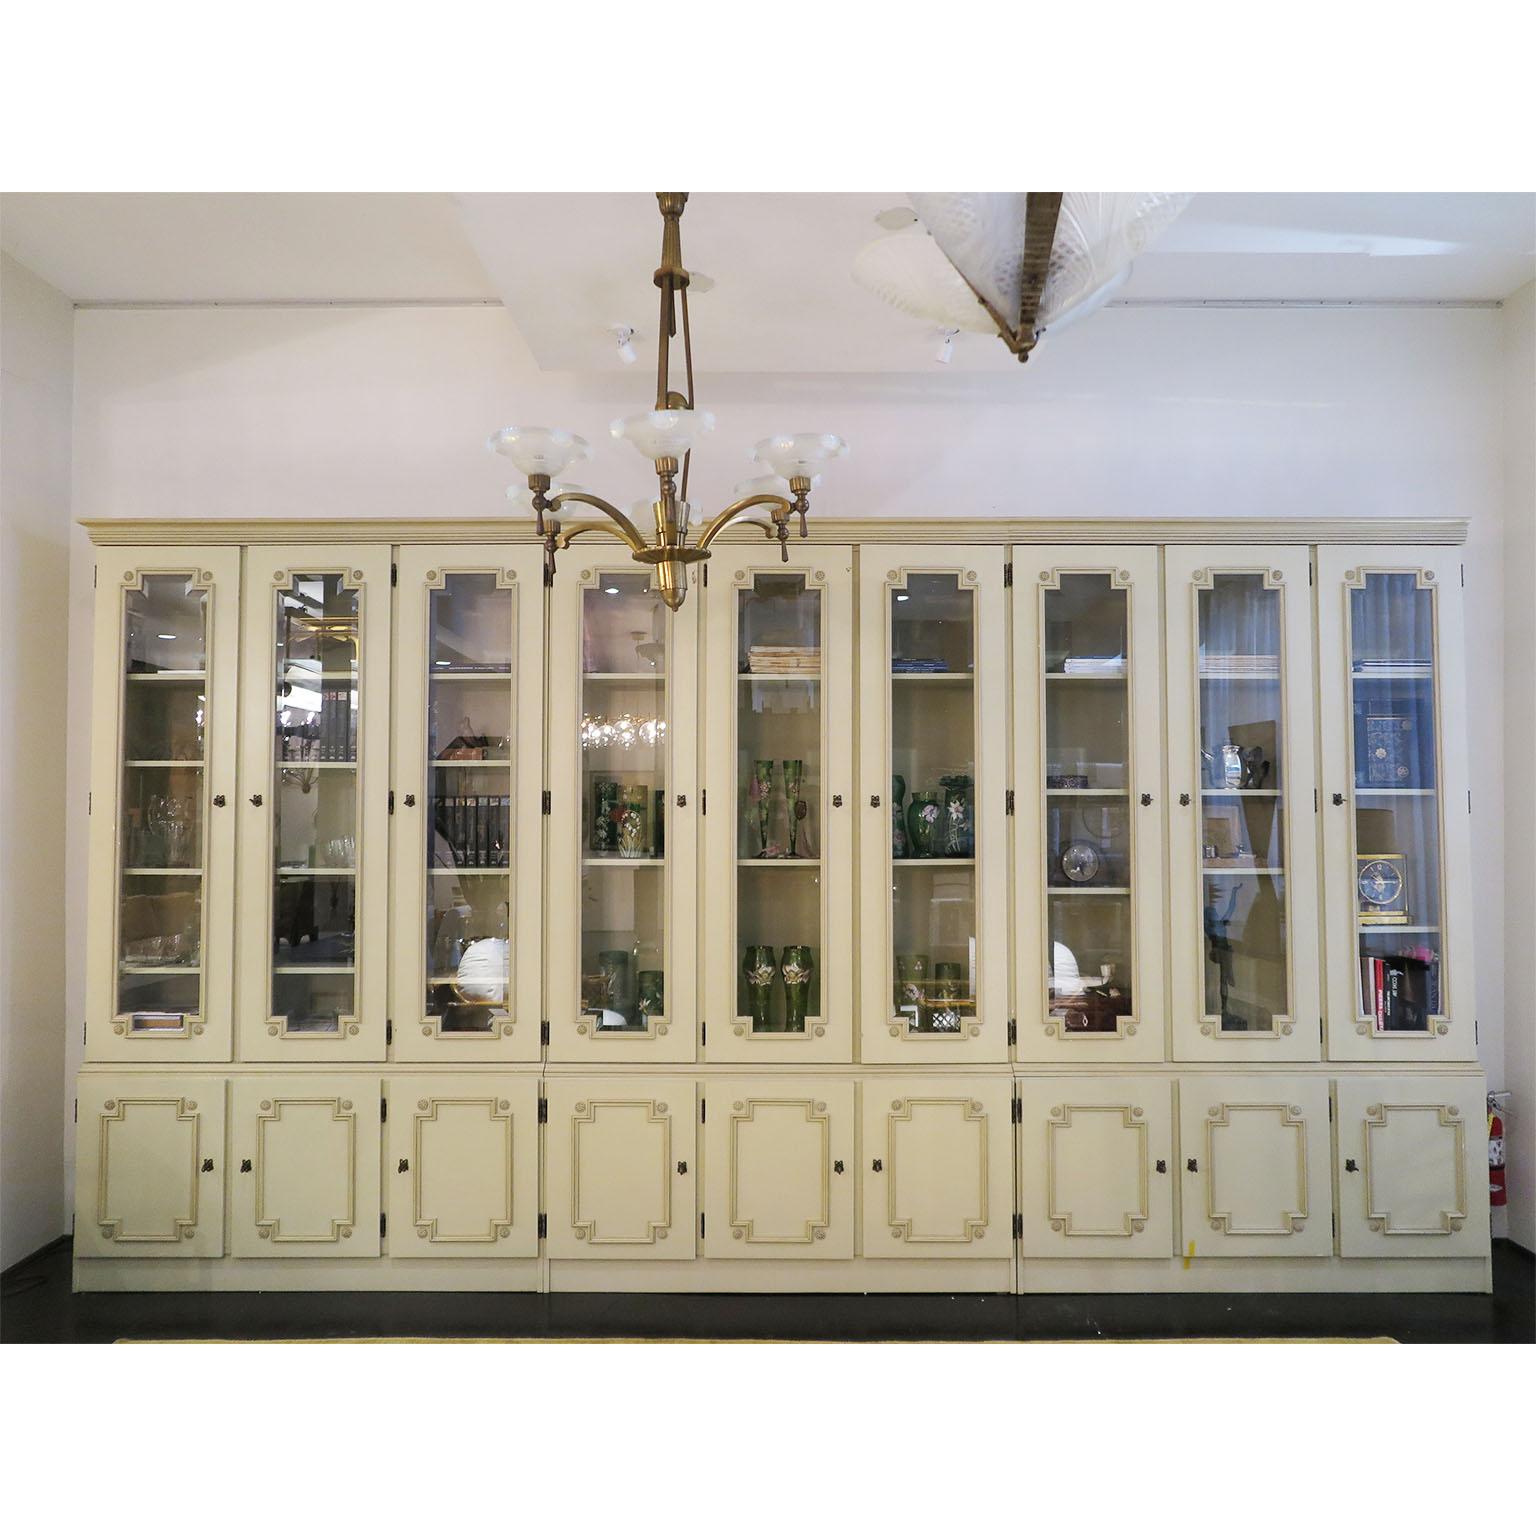 French bookcase with breakfront. Also to be used as cupboard for kitchen or dining spaces, our as decorative cabinet or vitrine for accessories and books in living room. Three units, each comprised of a top section with three beveled glass doors and